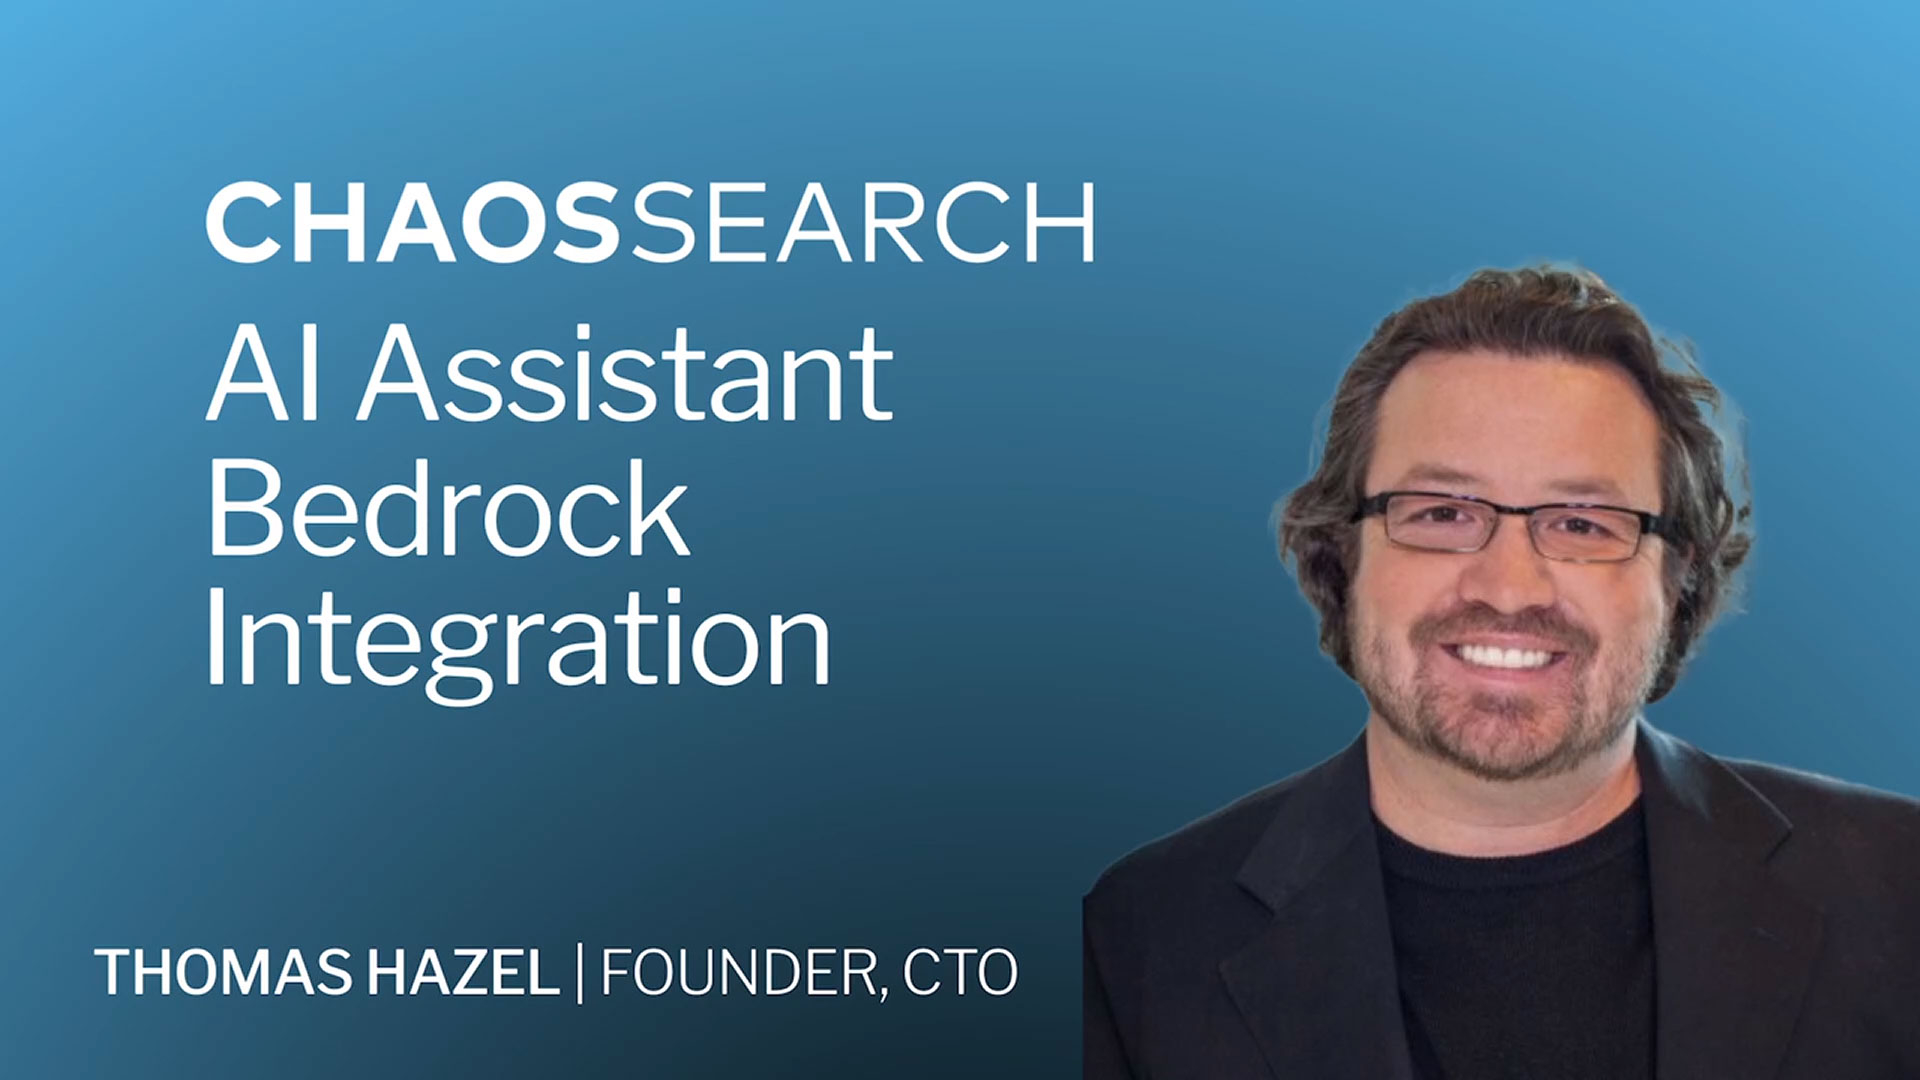 Thomas Hazel, CTO & Founder of ChaosSearch, shares how the new ChaosSearch integration with Amazon Bedrock is creating value for companies worldwide.